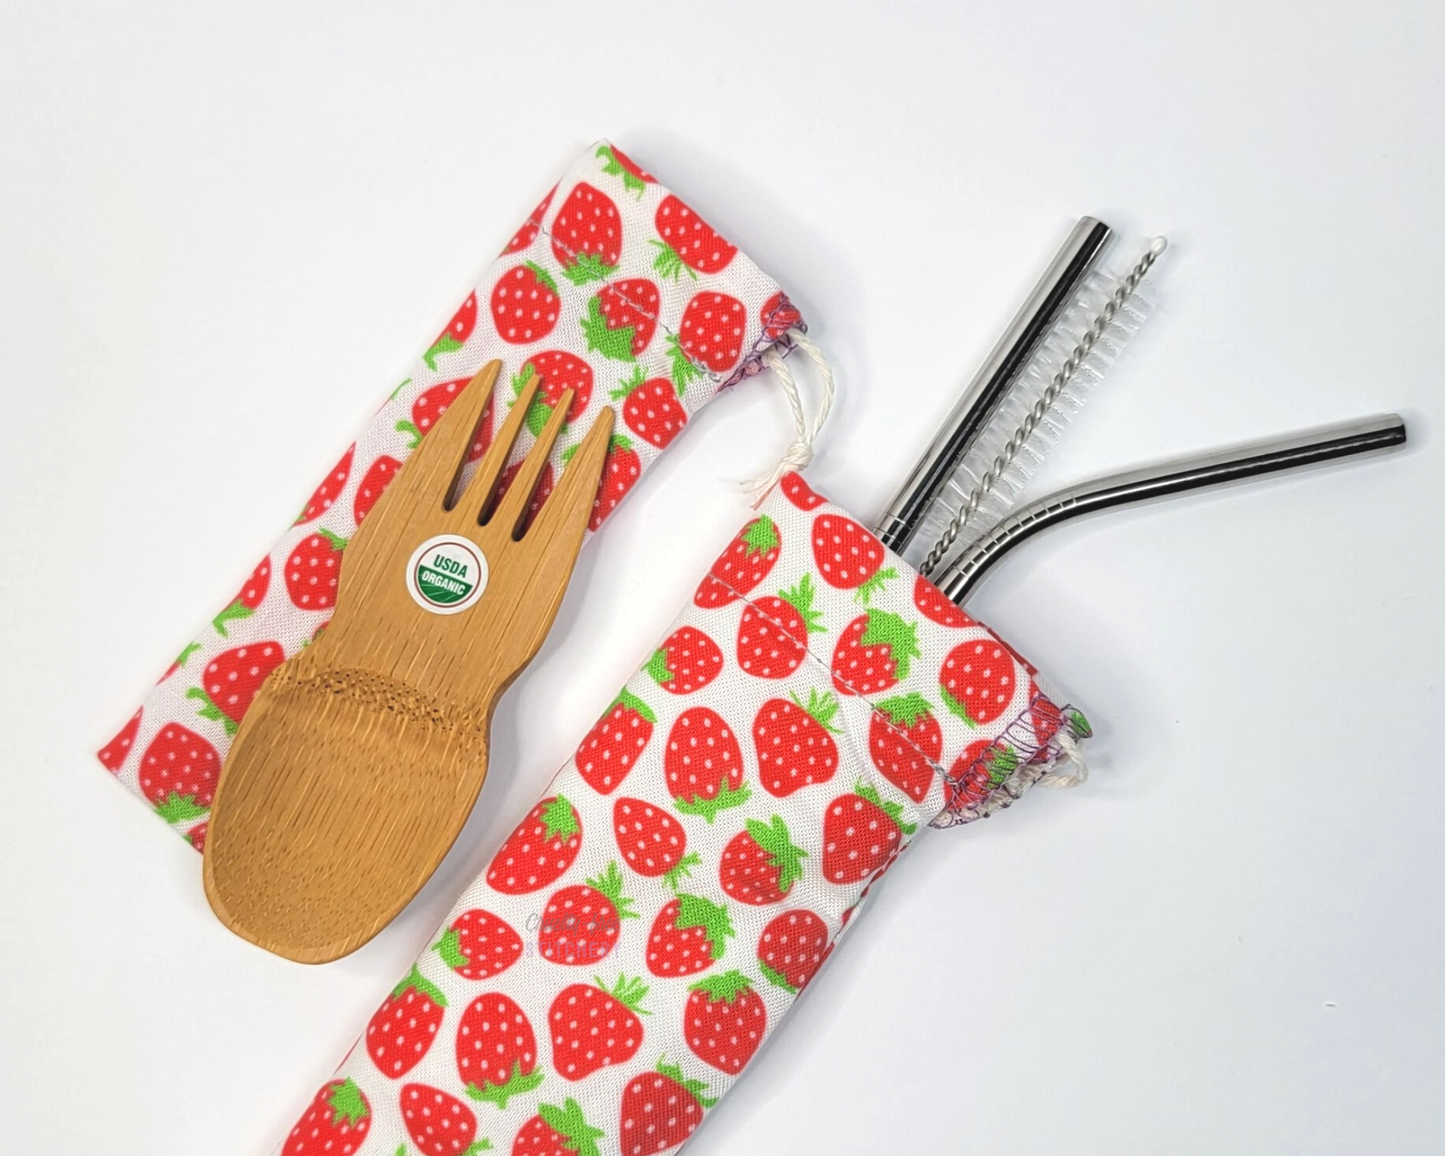 Reusable bamboo spork and stainless steel straw pouch set. The pouches are both white with tiny red strawberries.